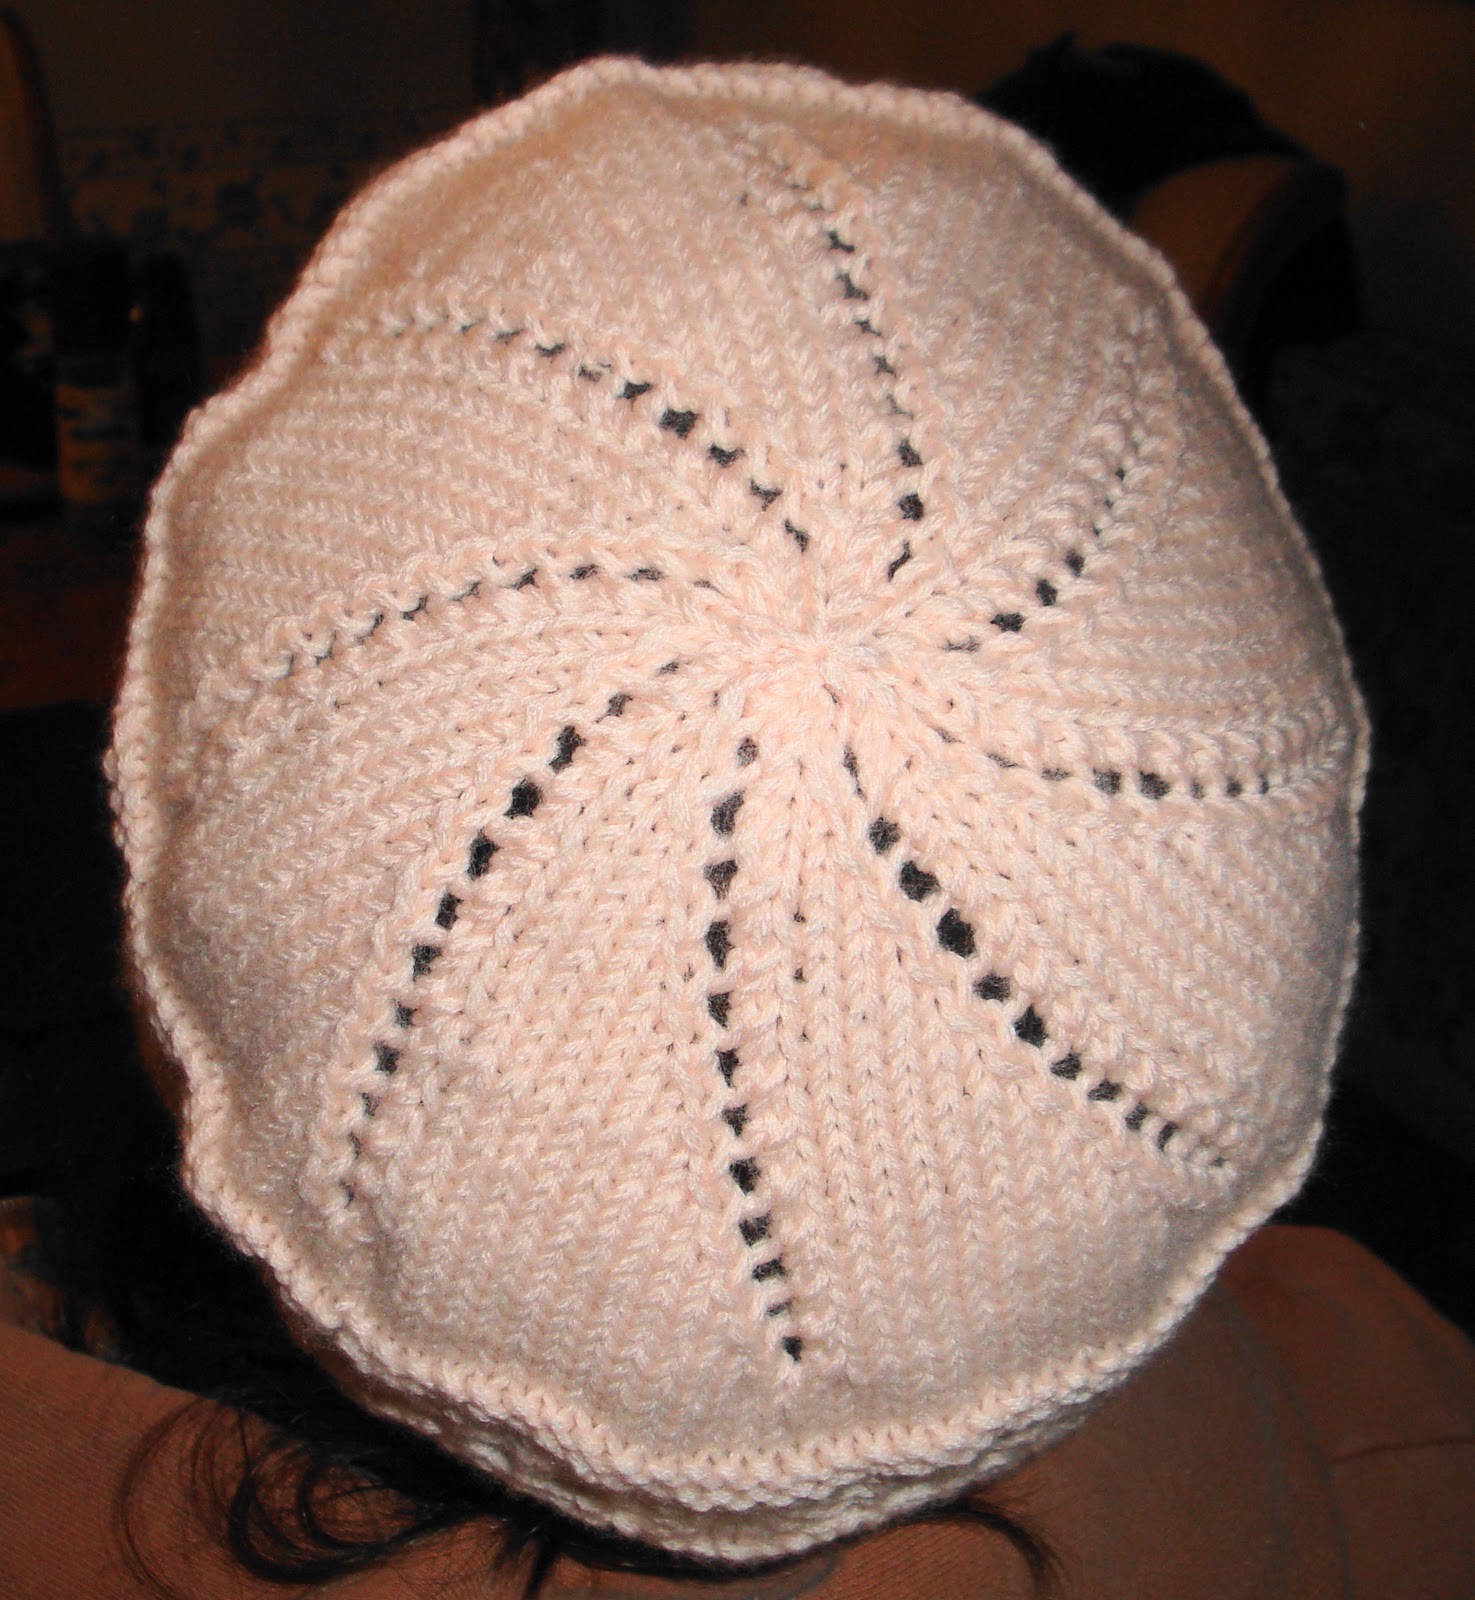 Where can you find free patterns for knitting chemo caps?